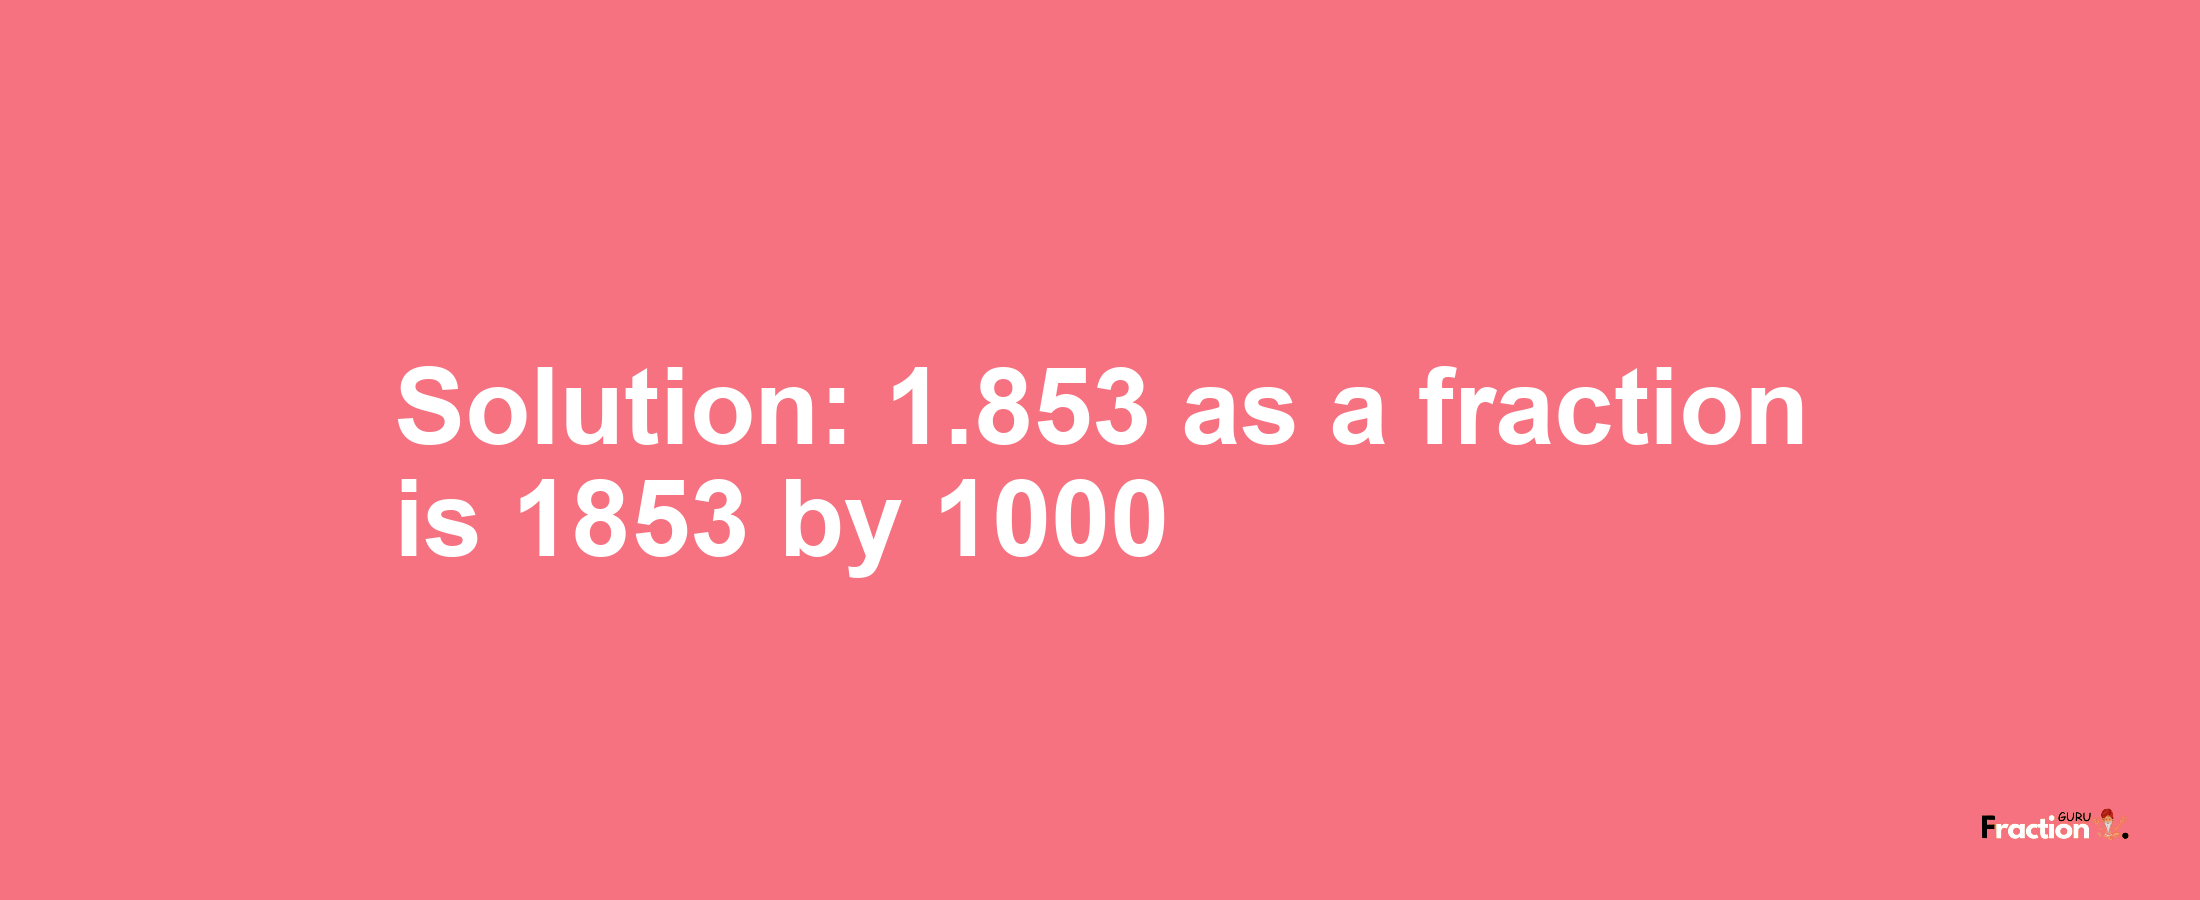 Solution:1.853 as a fraction is 1853/1000